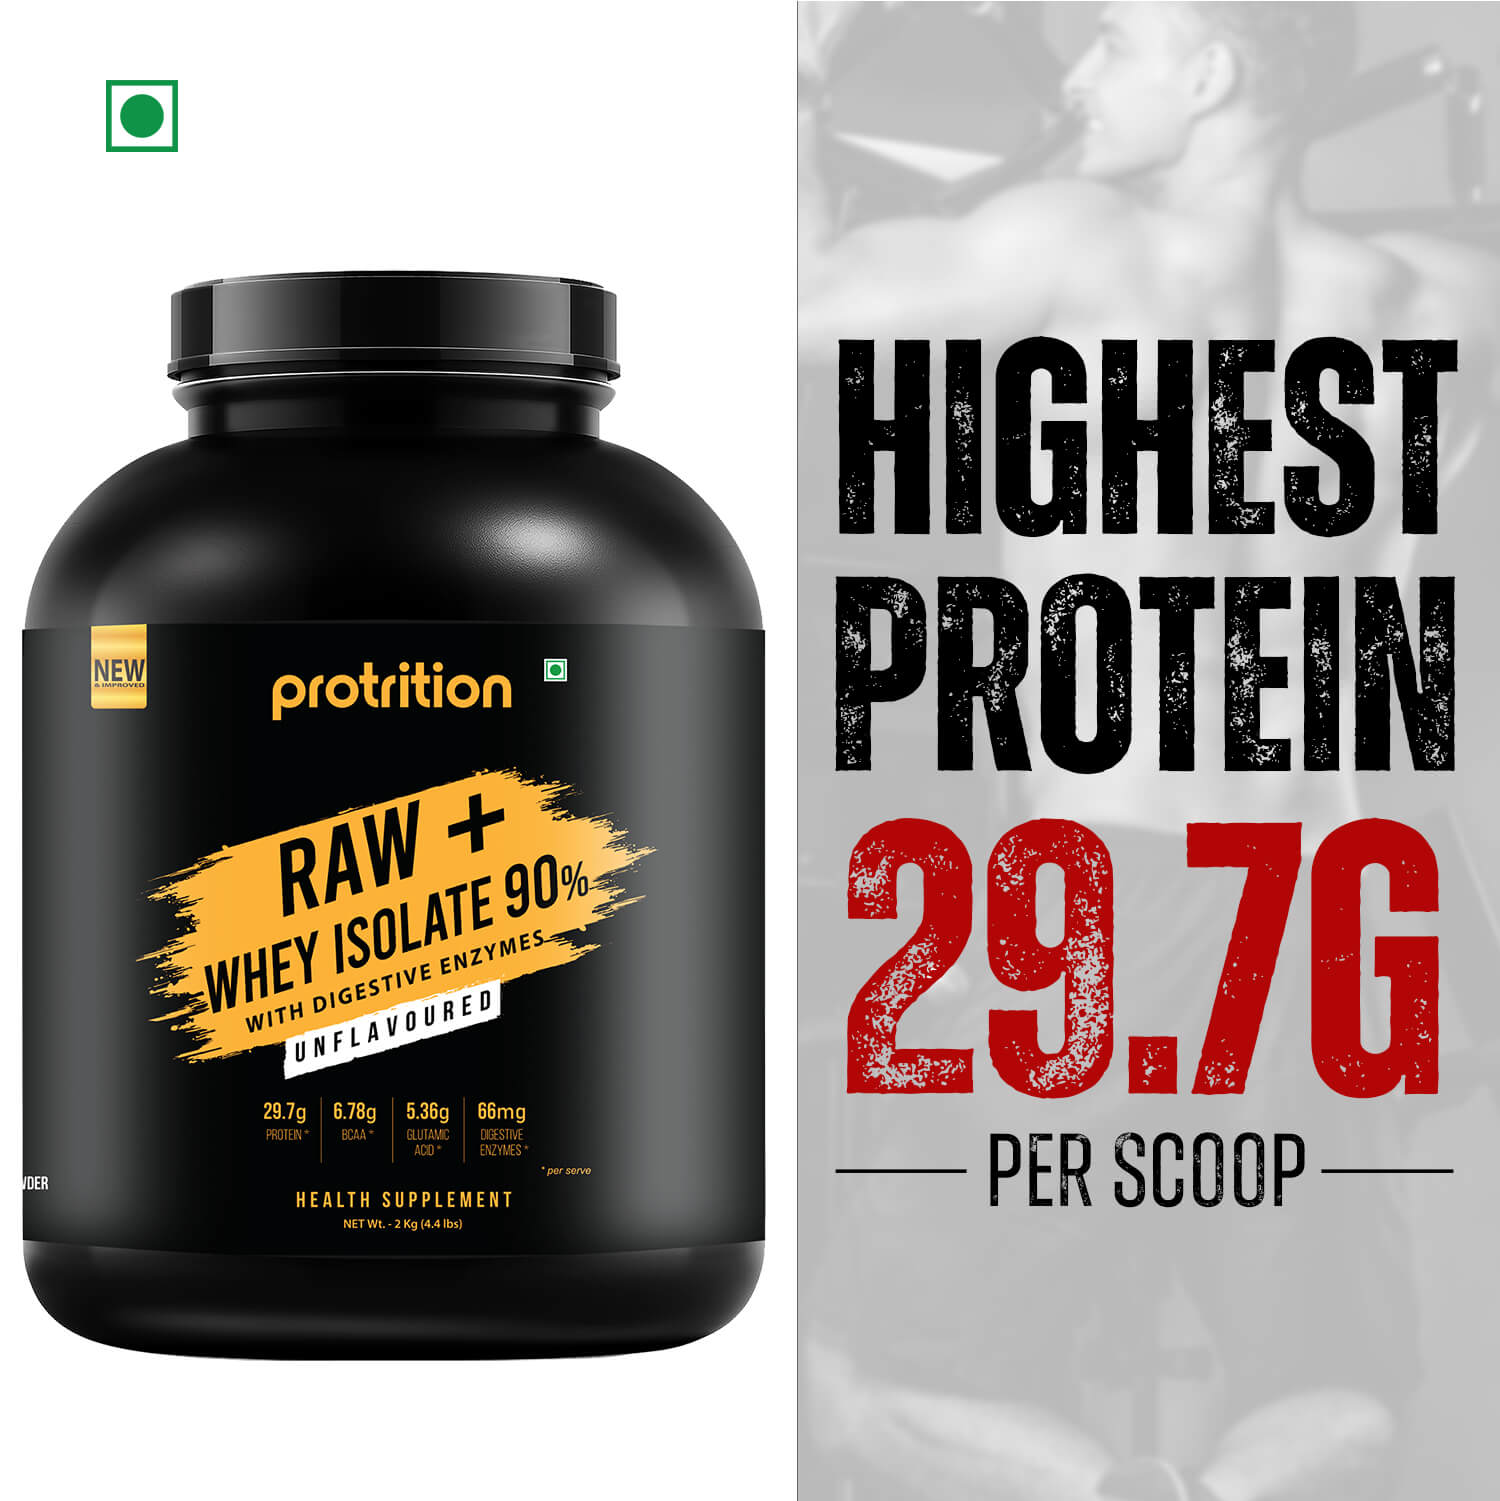 Protrition Raw+Whey Protein Isolate 90%, Unflavoured, 2Kg